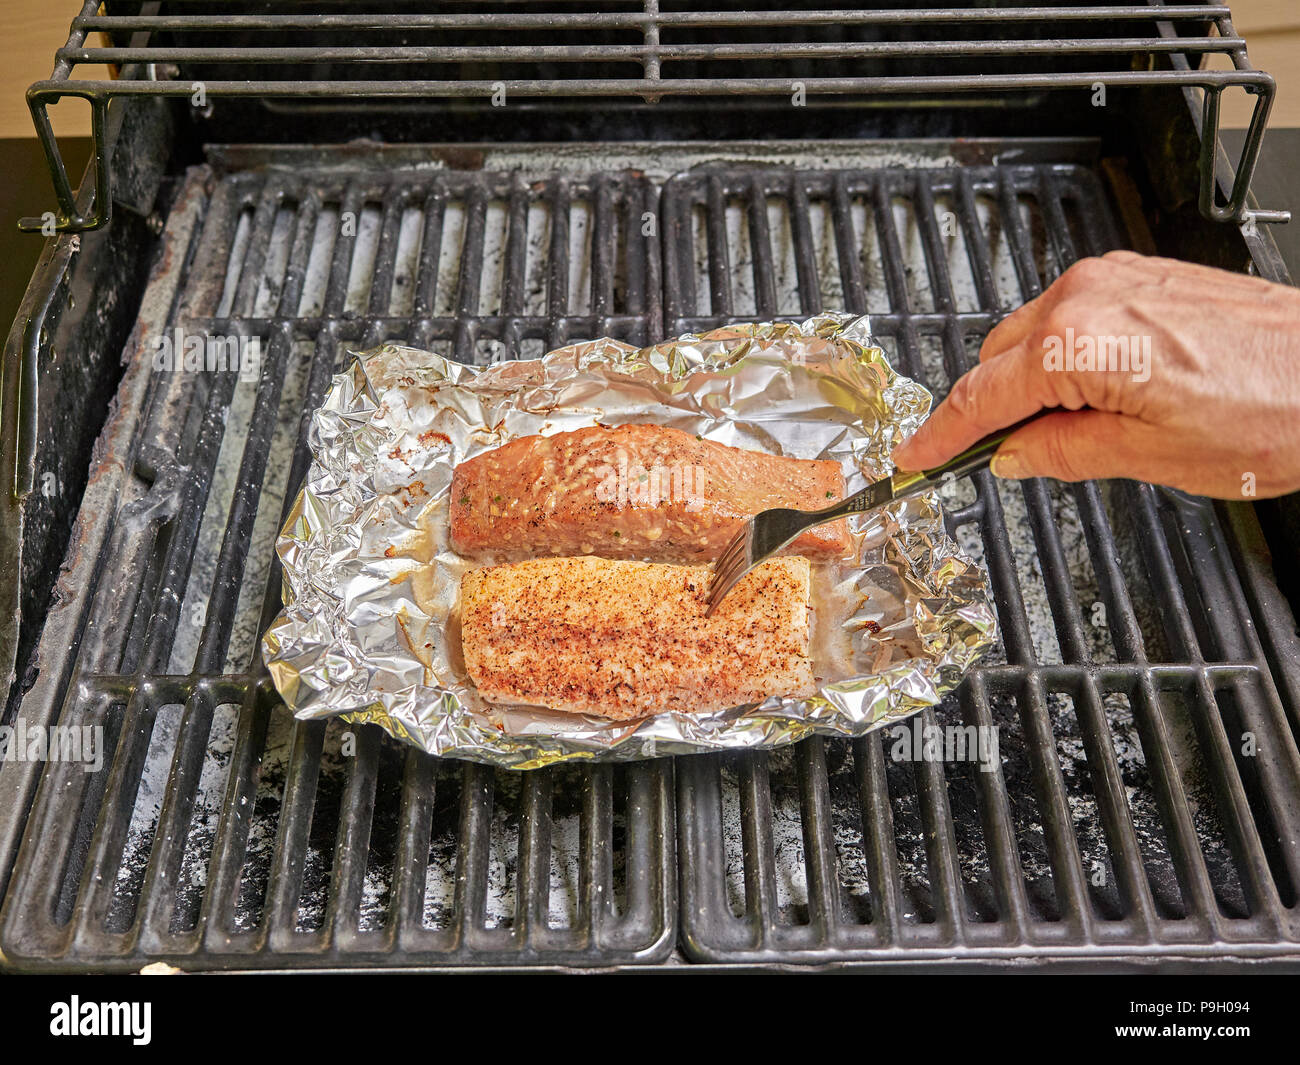 https://c8.alamy.com/comp/P9H094/cooking-salmon-and-white-fish-fillets-on-a-outdoor-grill-using-seasoning-P9H094.jpg